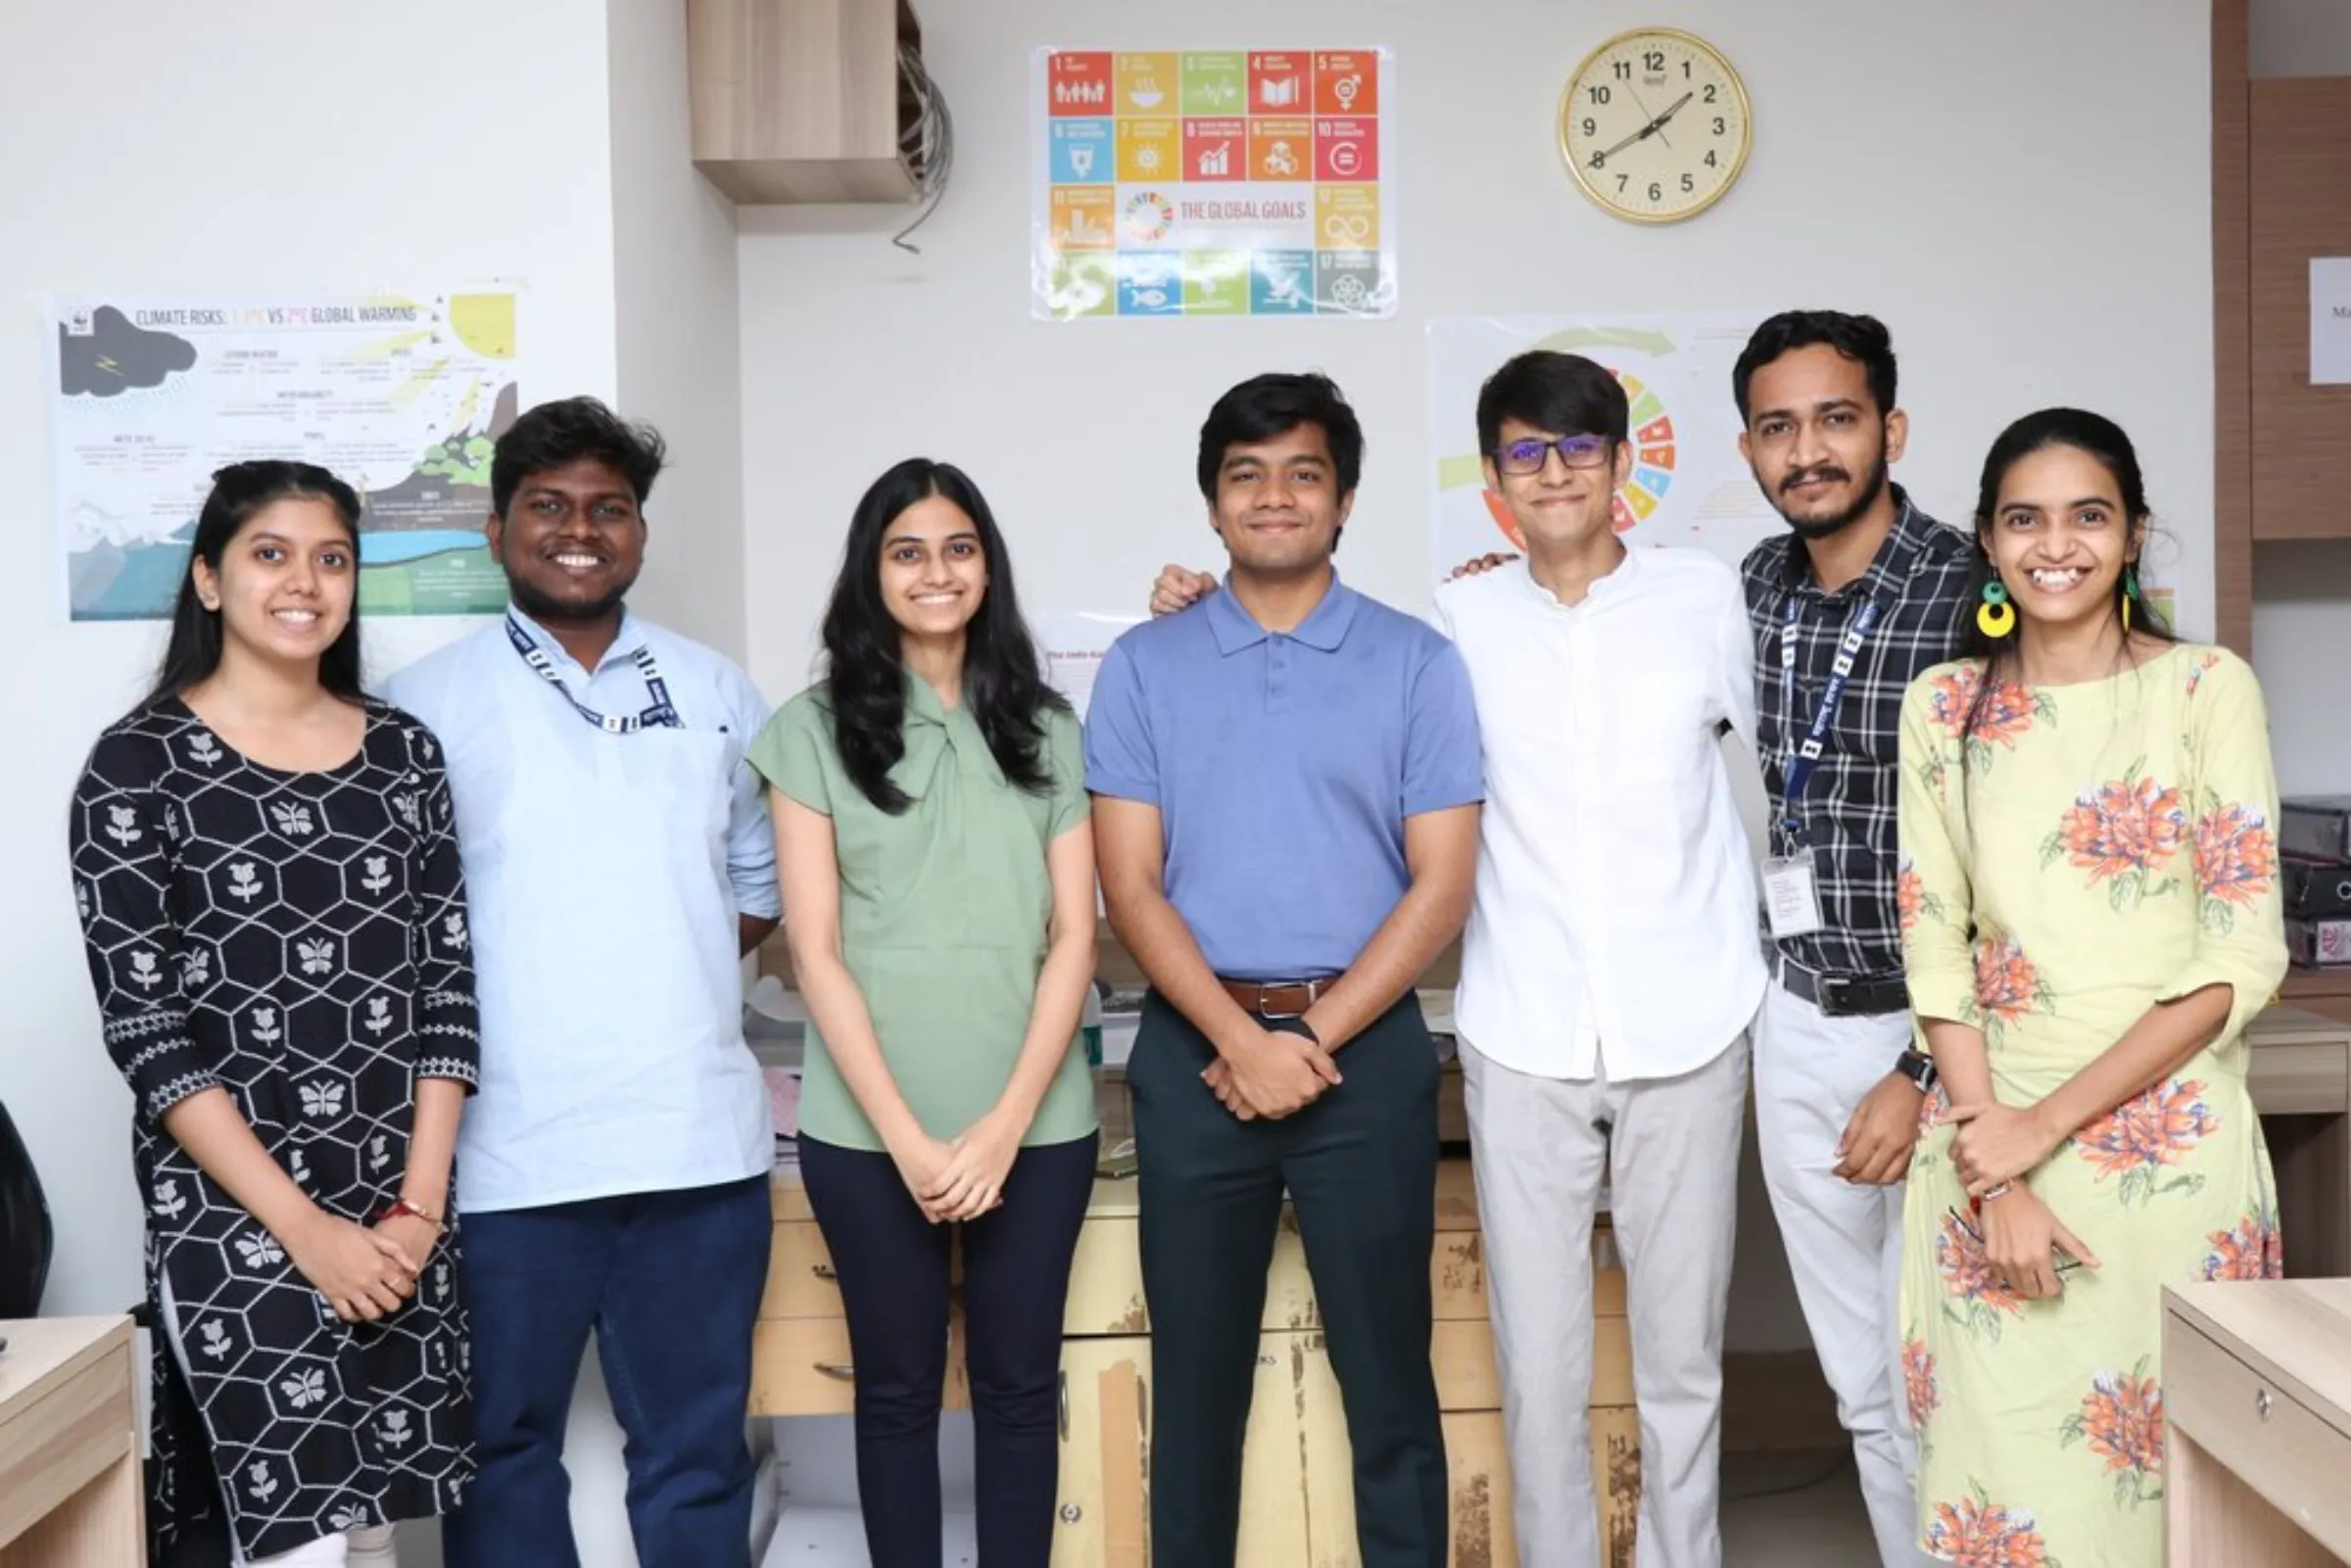 Members of a team of young climate fellows chosen by Maharastra state – including Saurabh Punamiya-Jain, at center in blue - pose for a photograph at their office in Mumbai, India, September 2, 2021